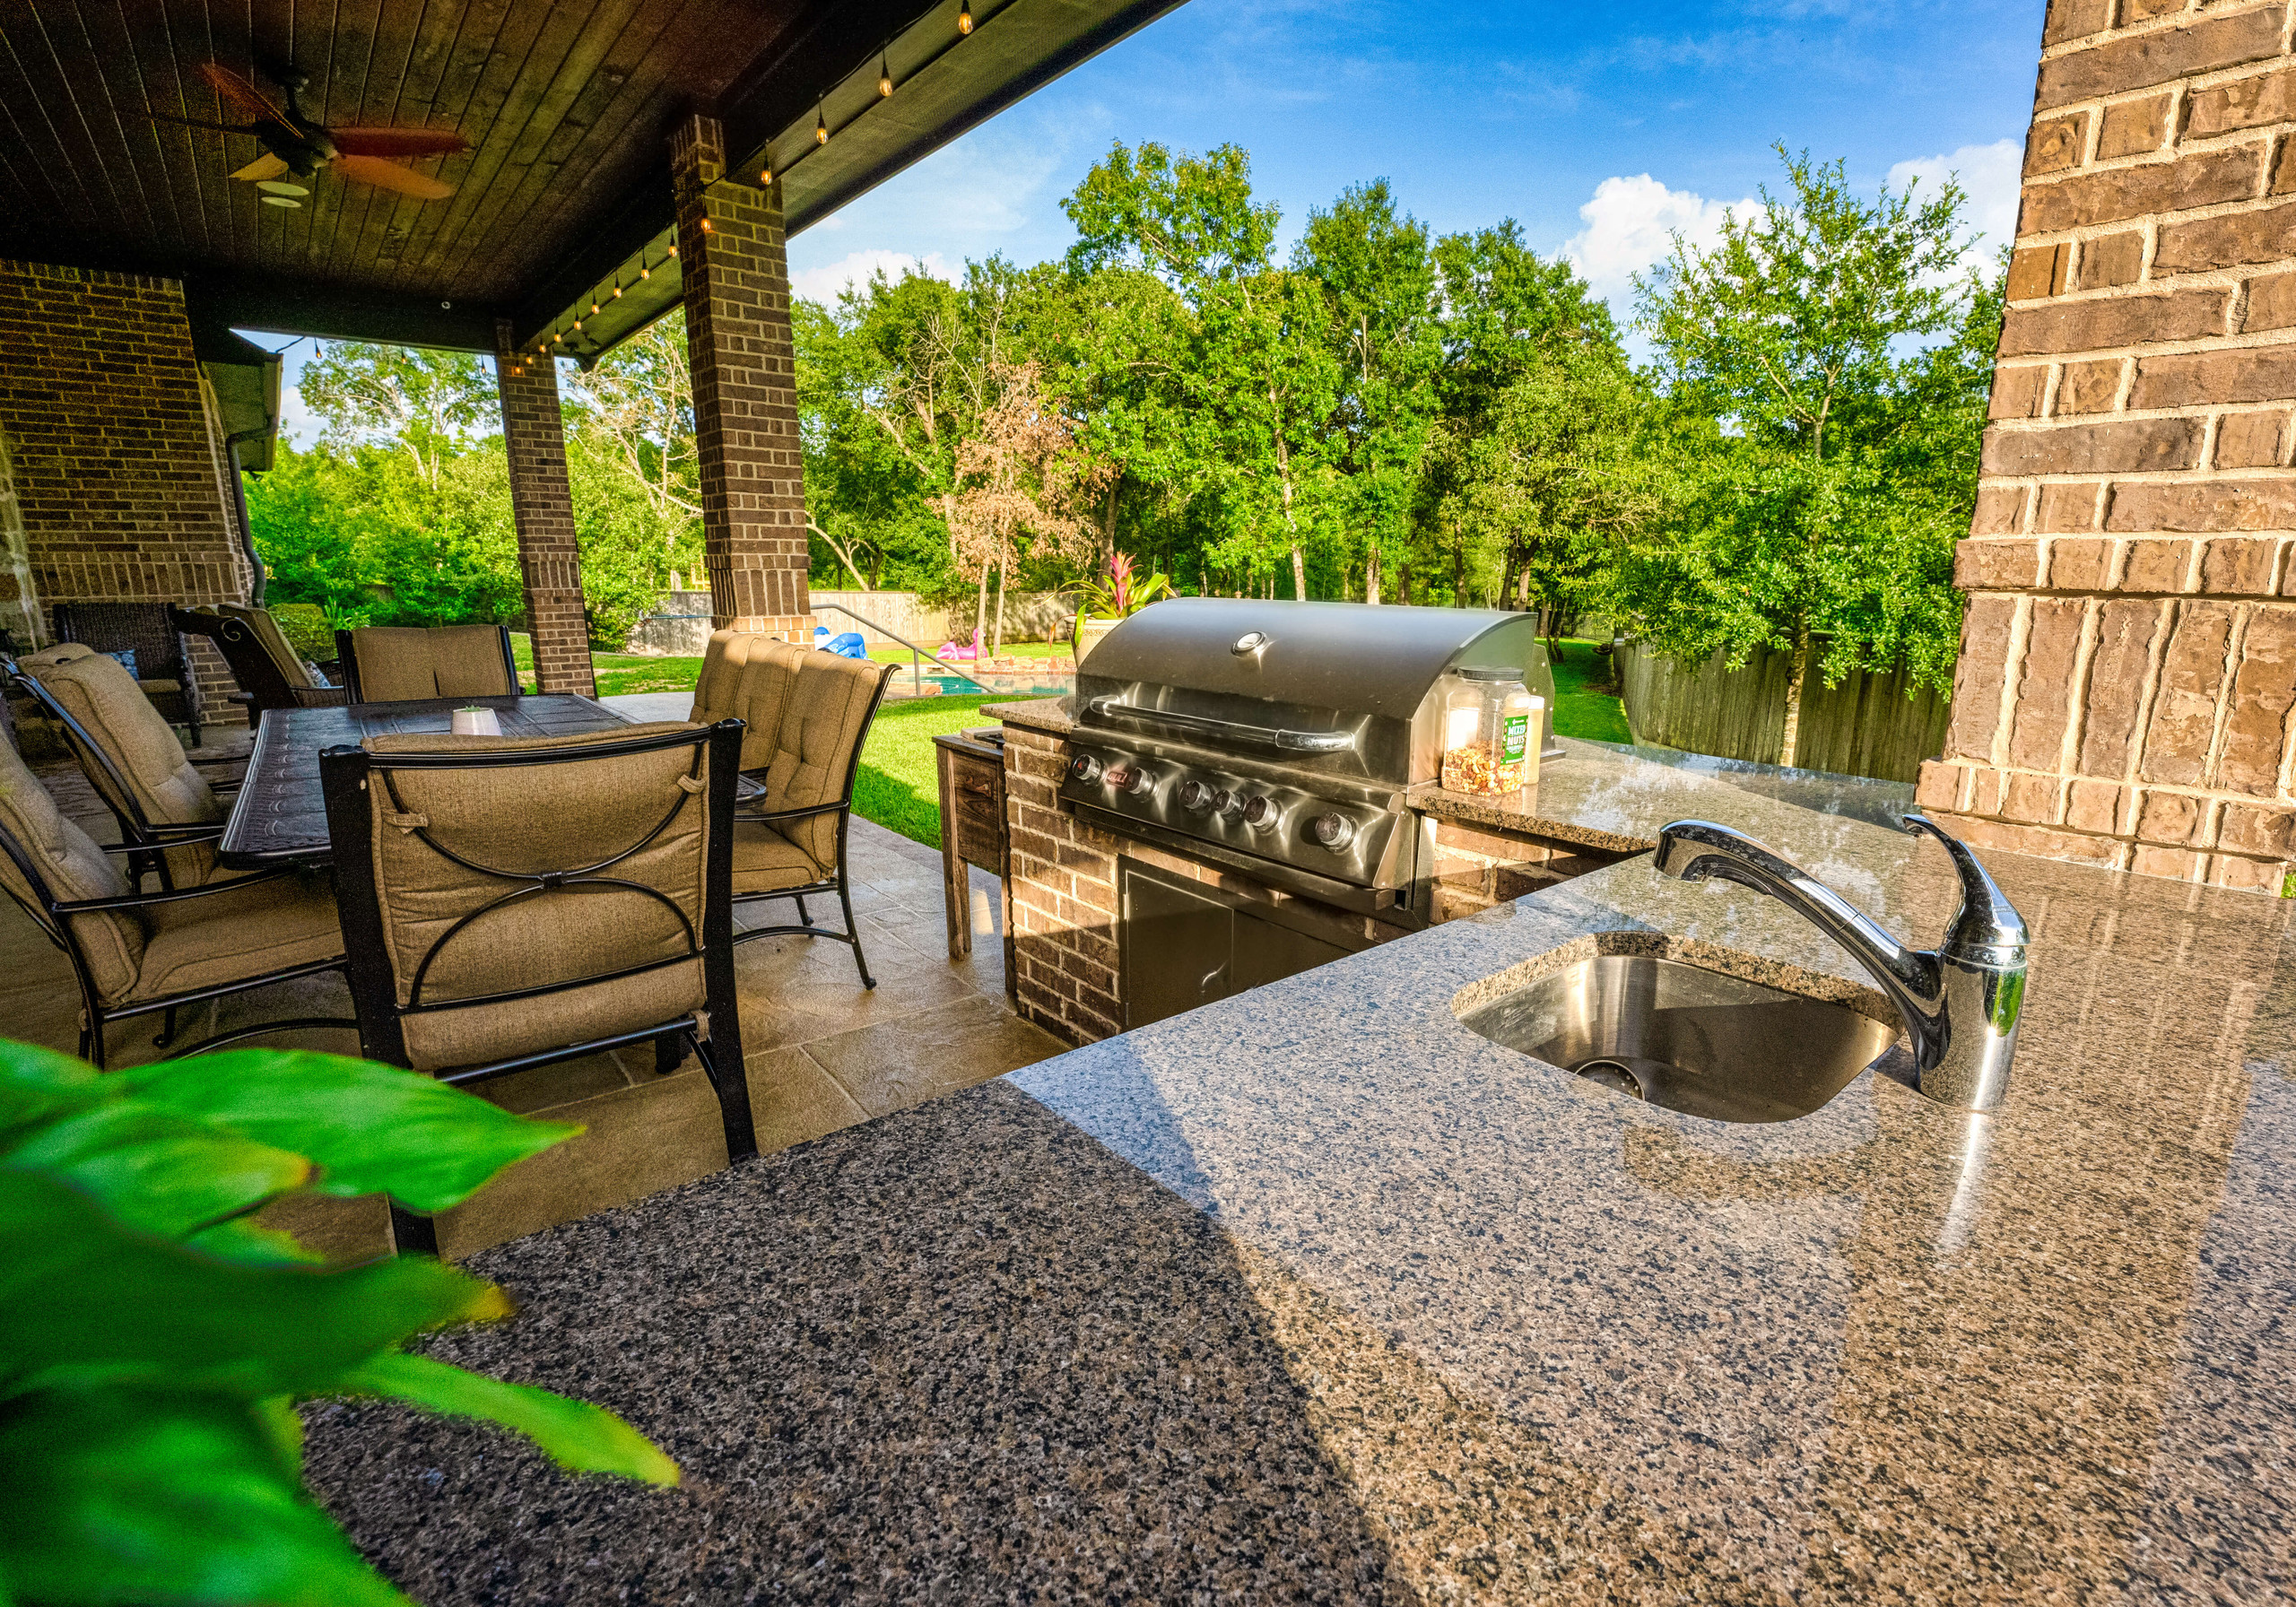 Granite outdoor countertop with grill area